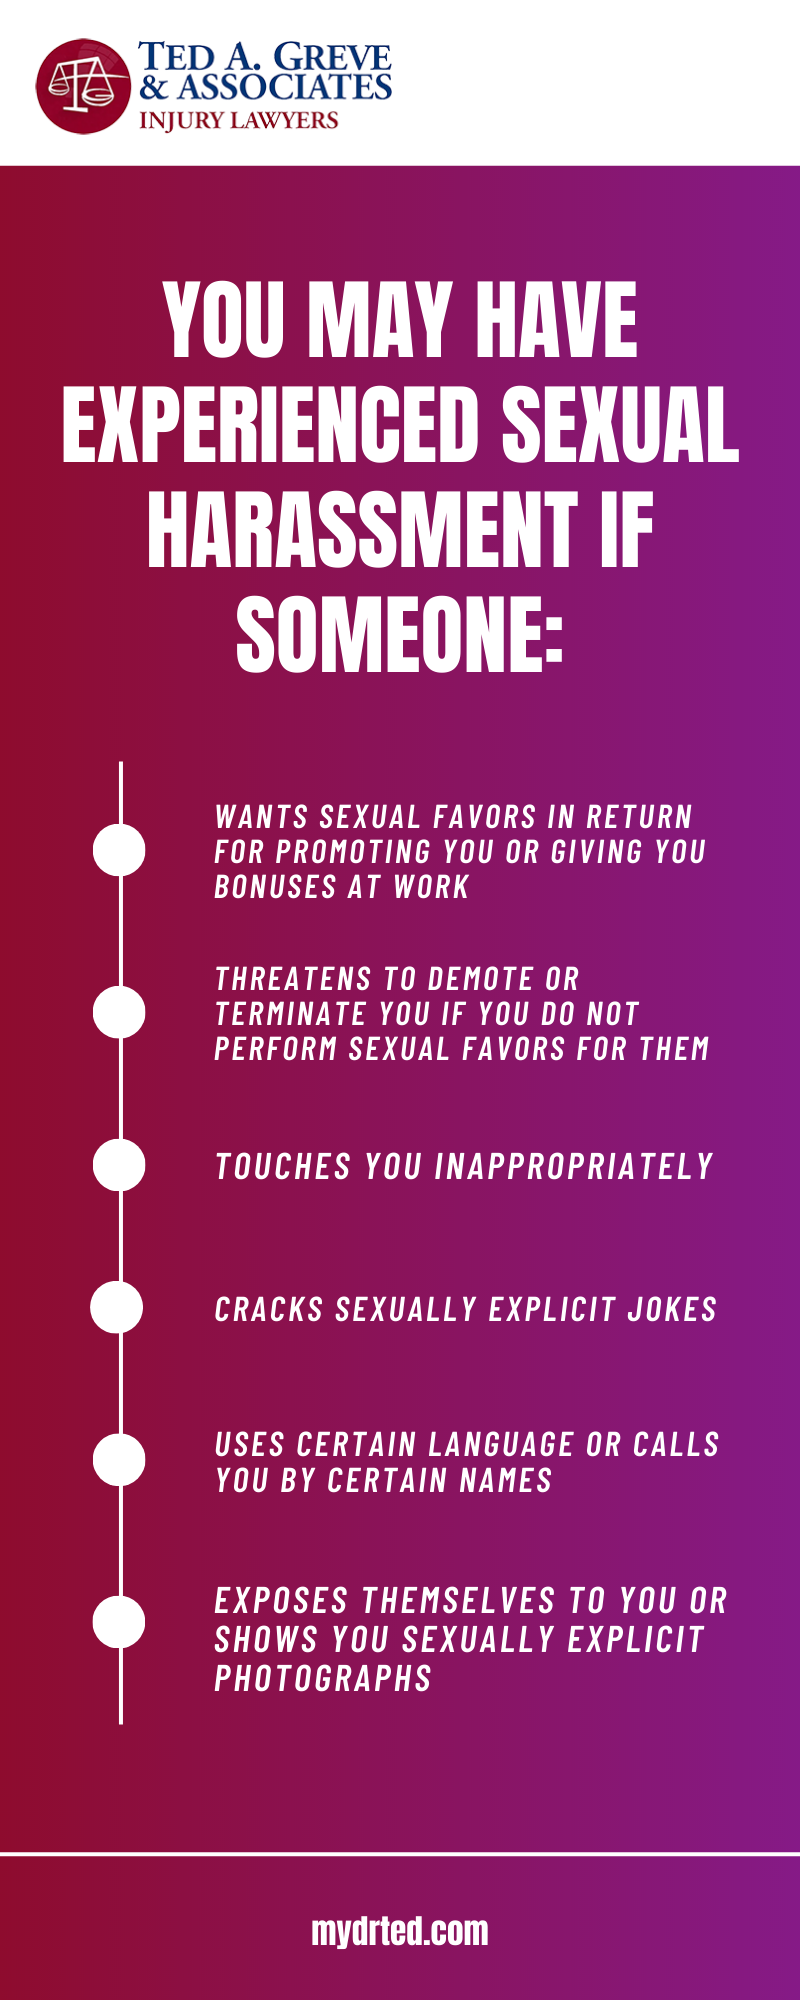 YOU MAY HAVE EXPERIENCED SEXUAL HARASSMENT IF SOMEONE INFOGRAPHIC